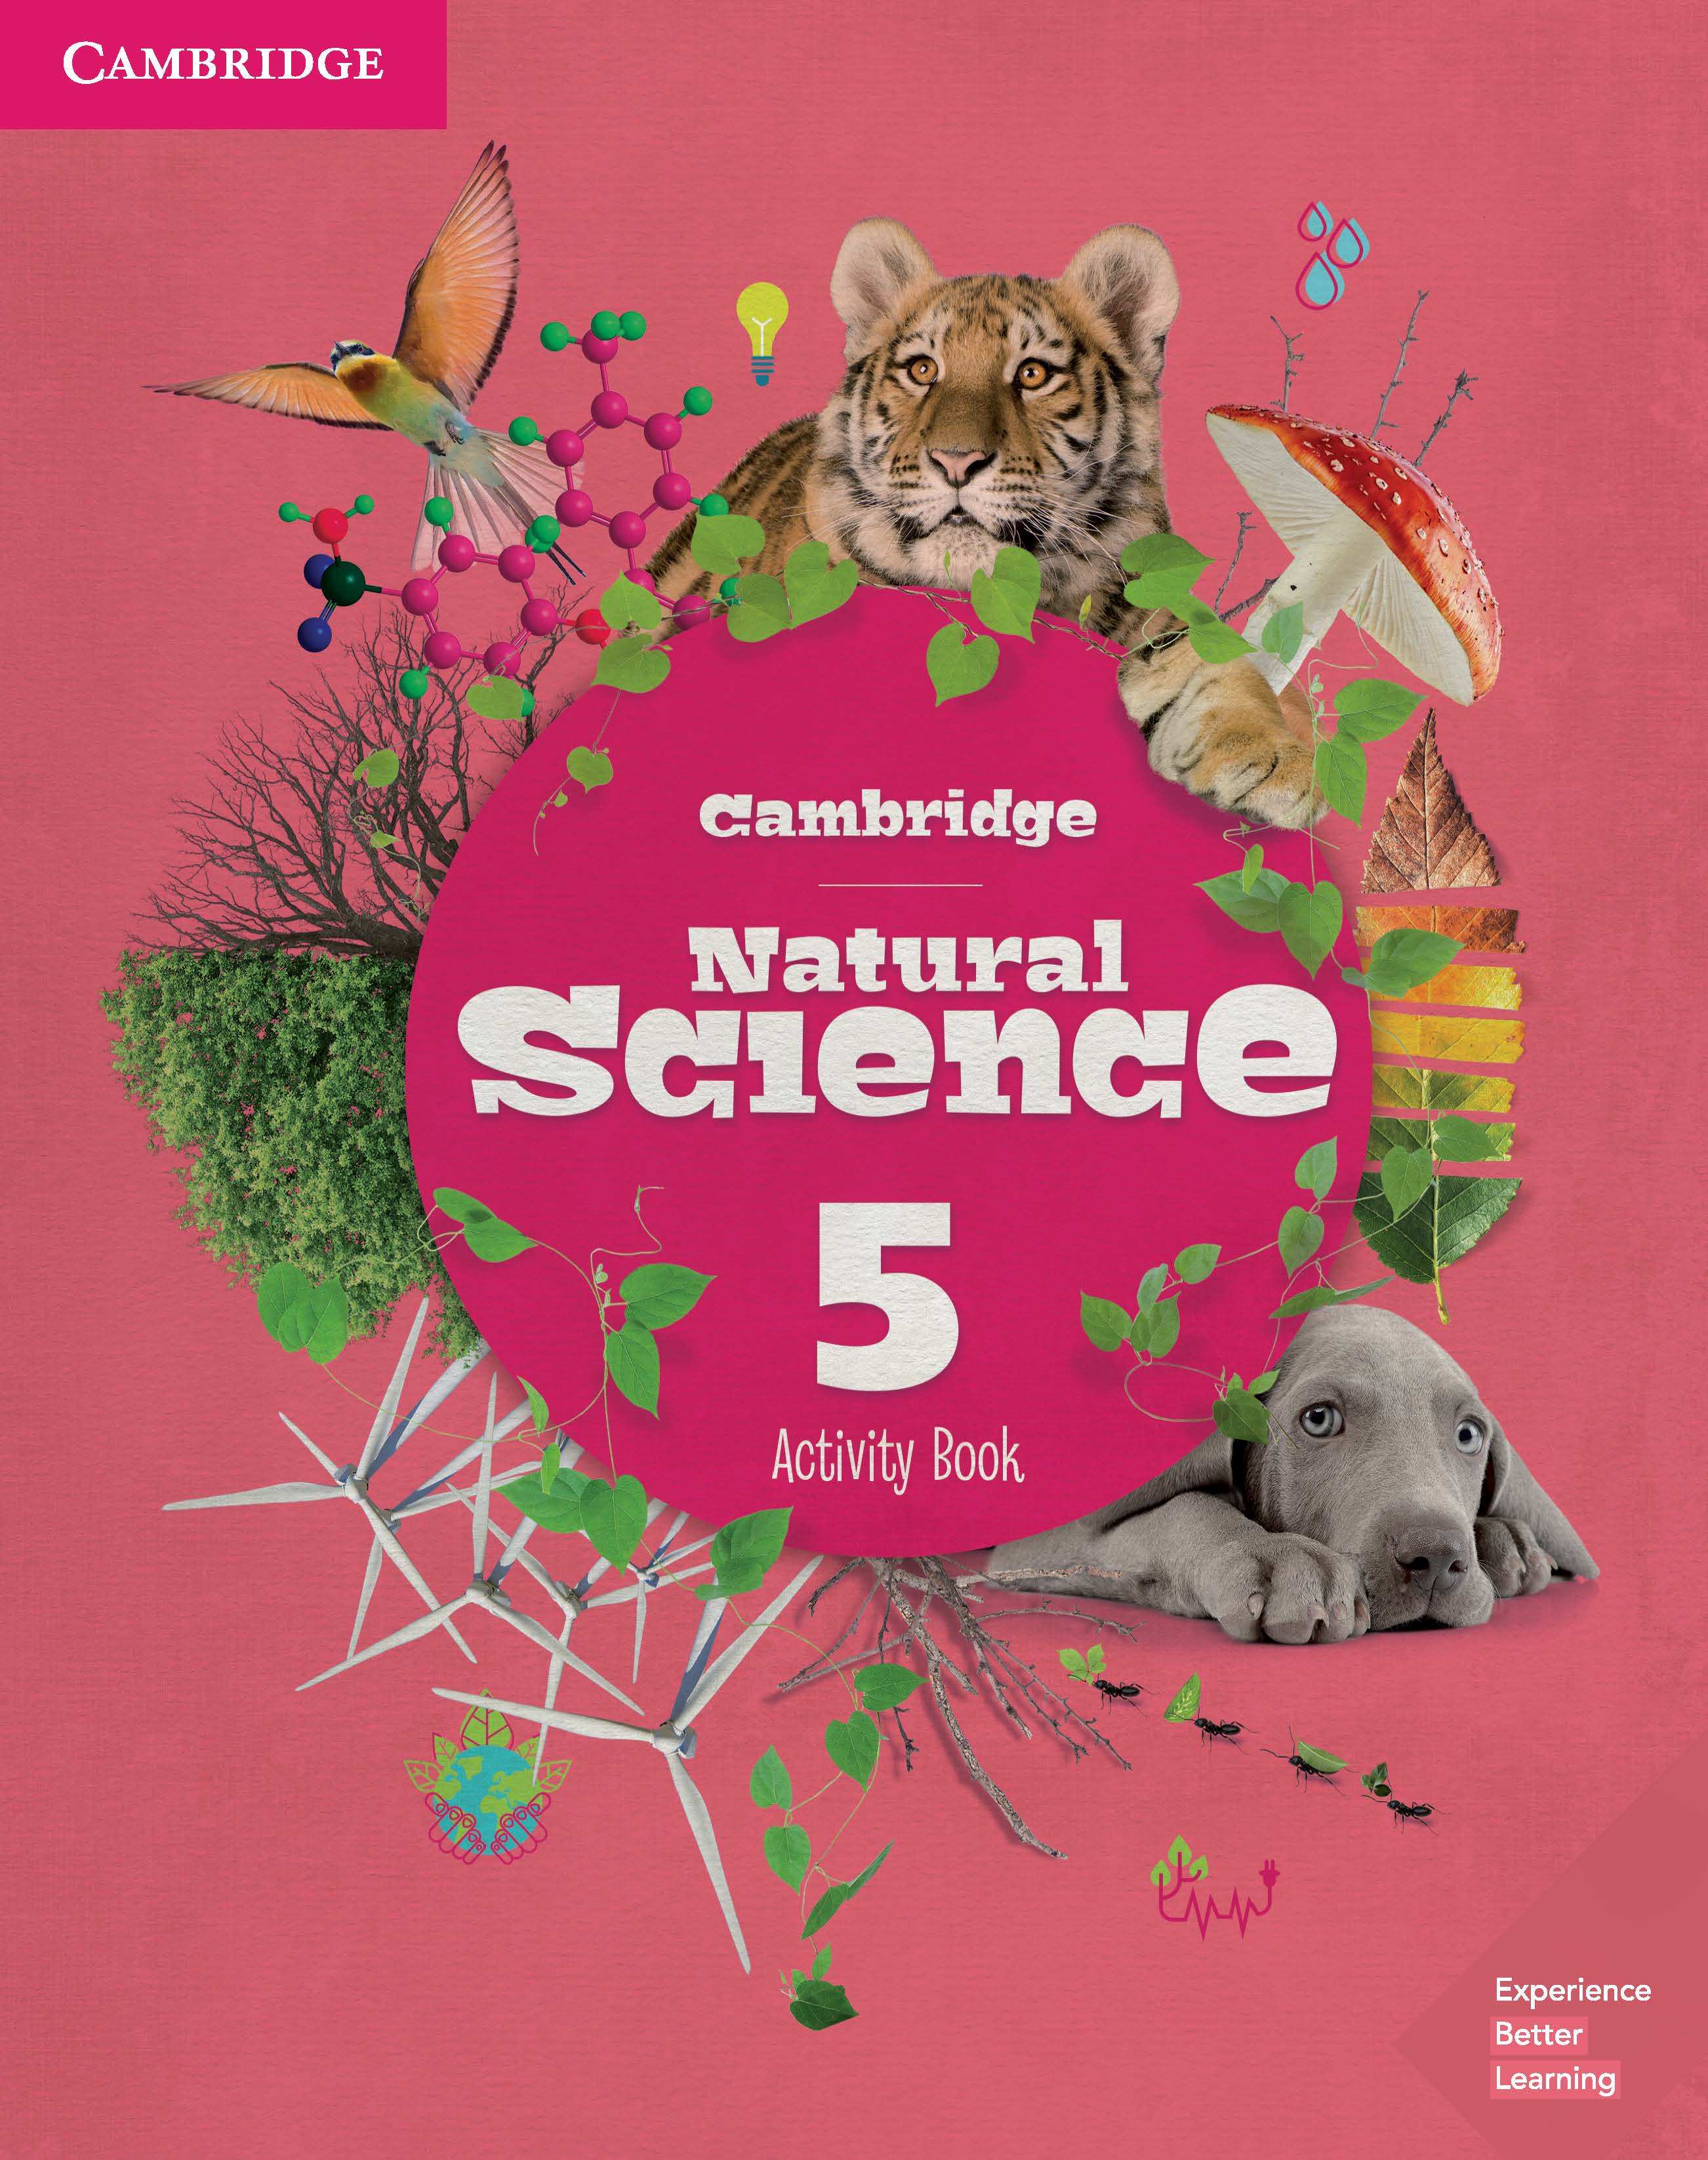 Natural Science 5 Activity Book